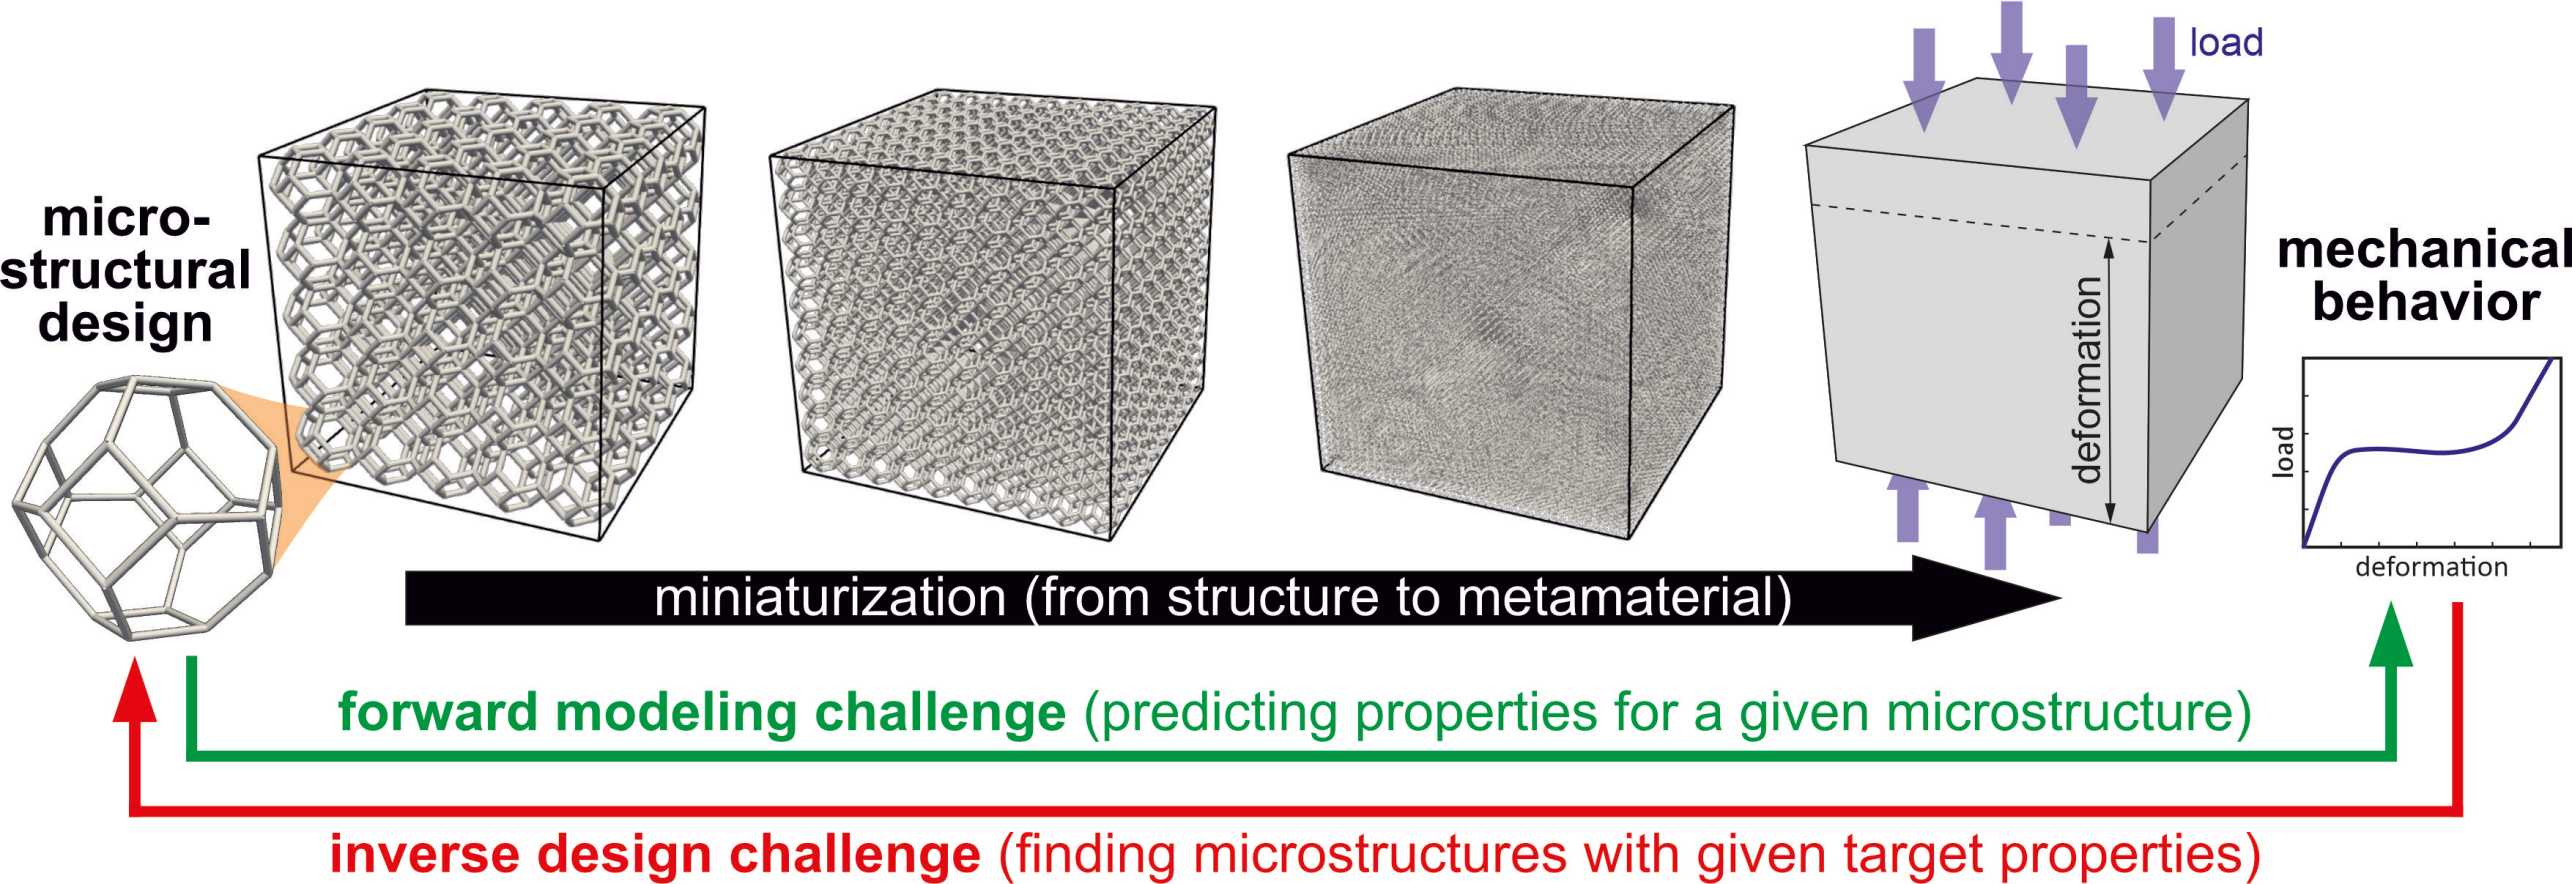 Enlarged view: Model finding microstructures